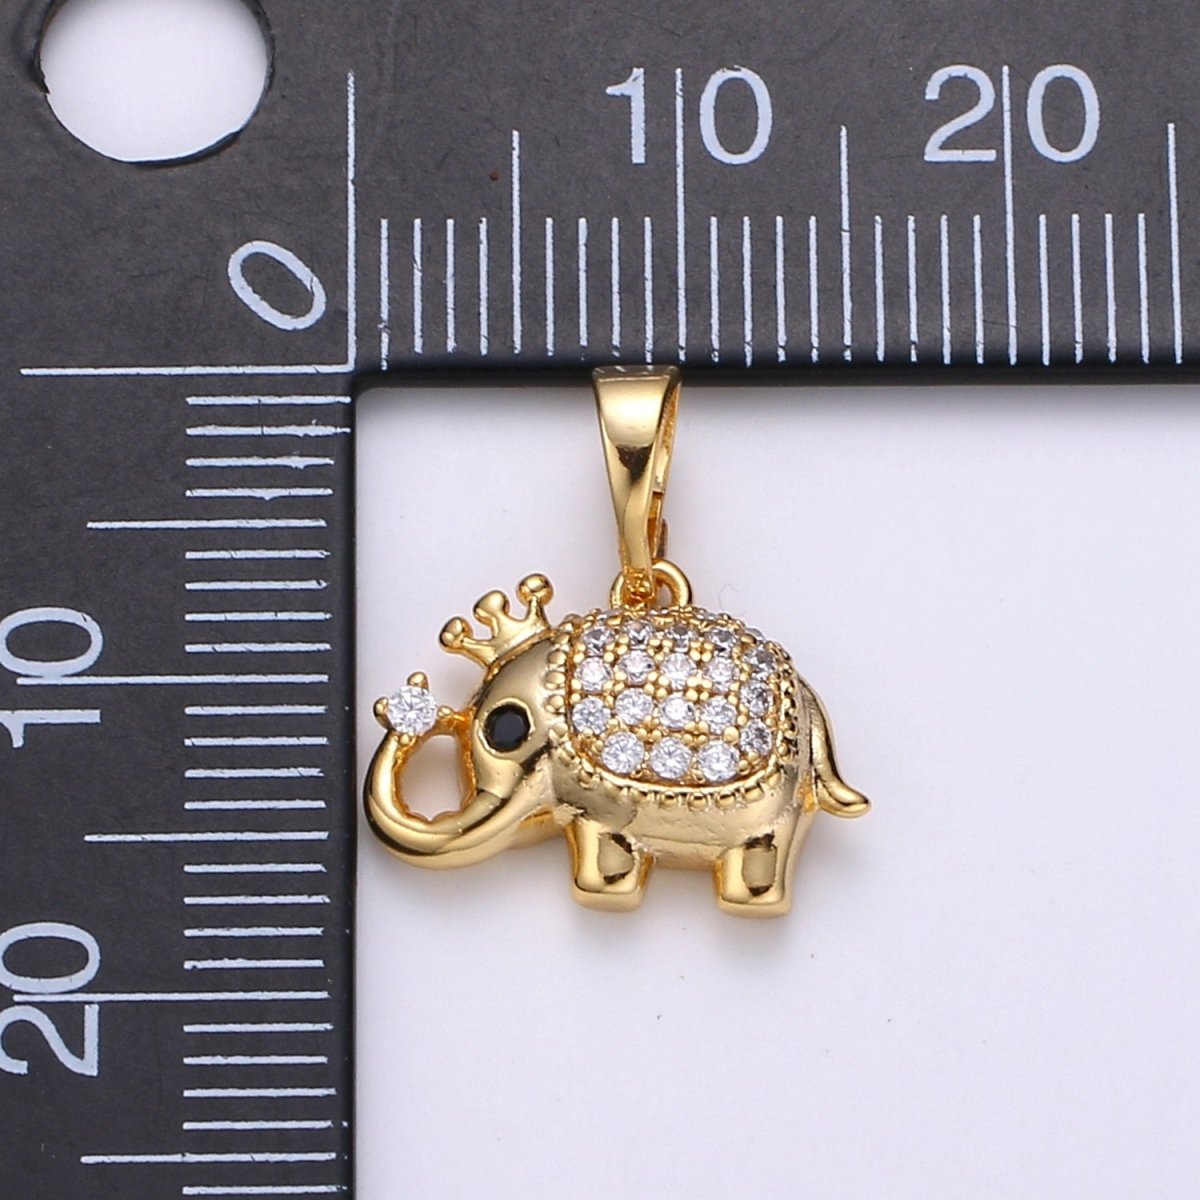 Tiny Micro Pave Elephant Charms 24k Gold Filled Micro Pave CZ Elephant for Wild Animal Inspired Jewelry Charm J-237 - DLUXCA